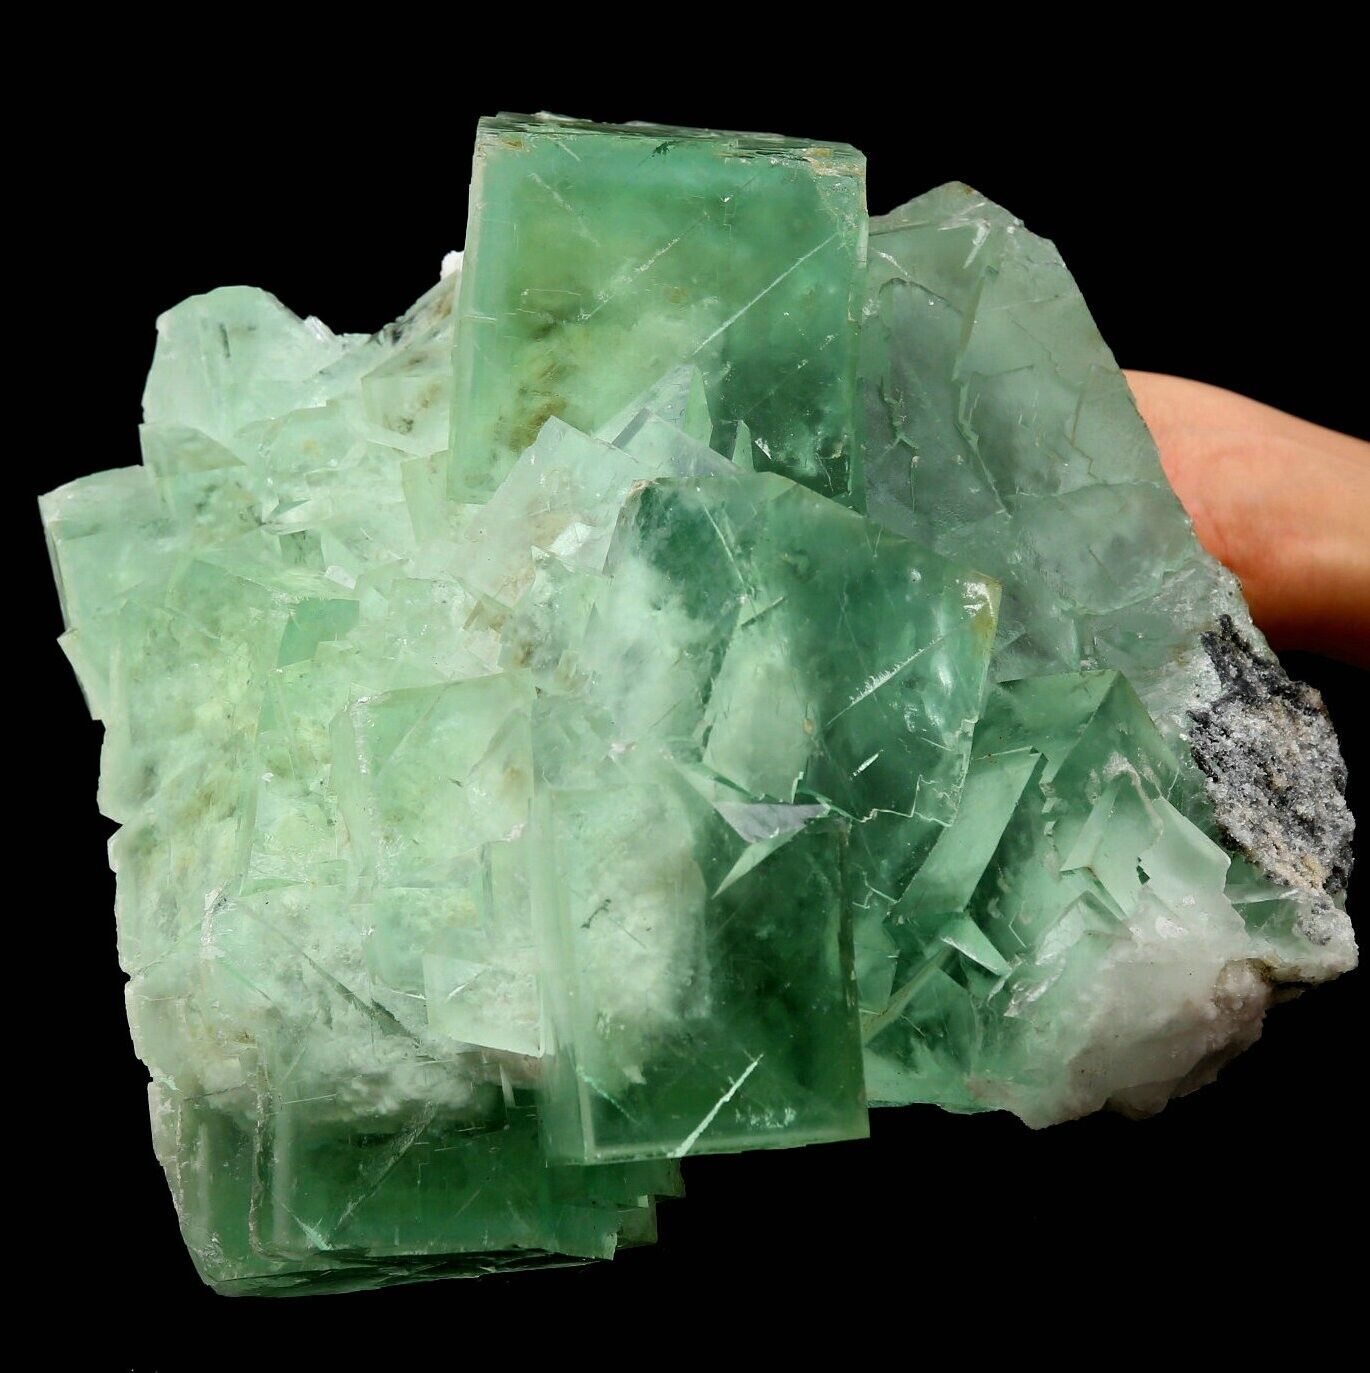 14.7LB  Large Particles Transparent Green Fluorite Mineral Specimen/China  A0937